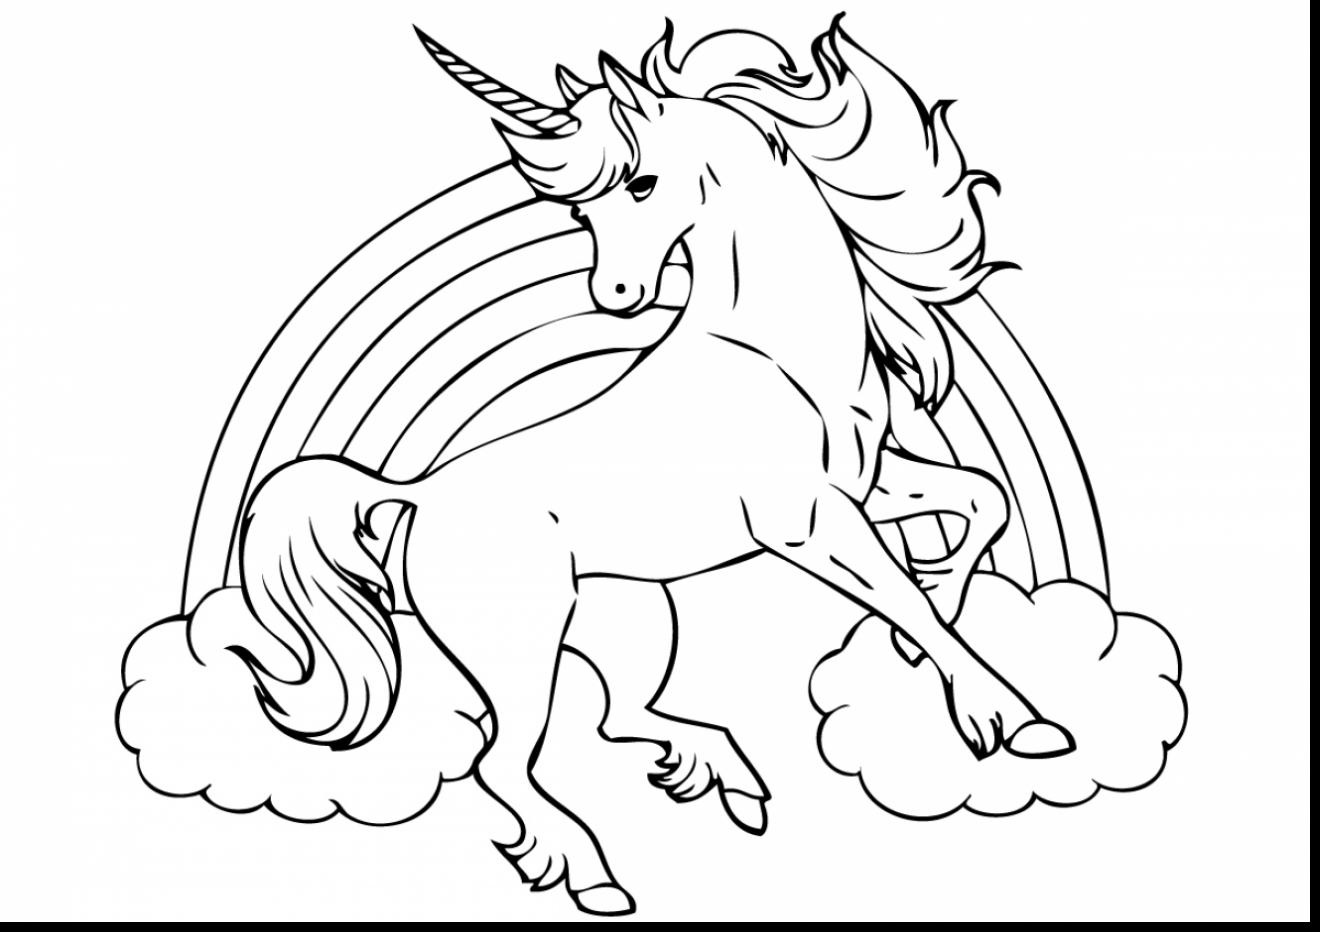 Despicable Me Unicorn Coloring Pages at GetColorings.com   Free ...